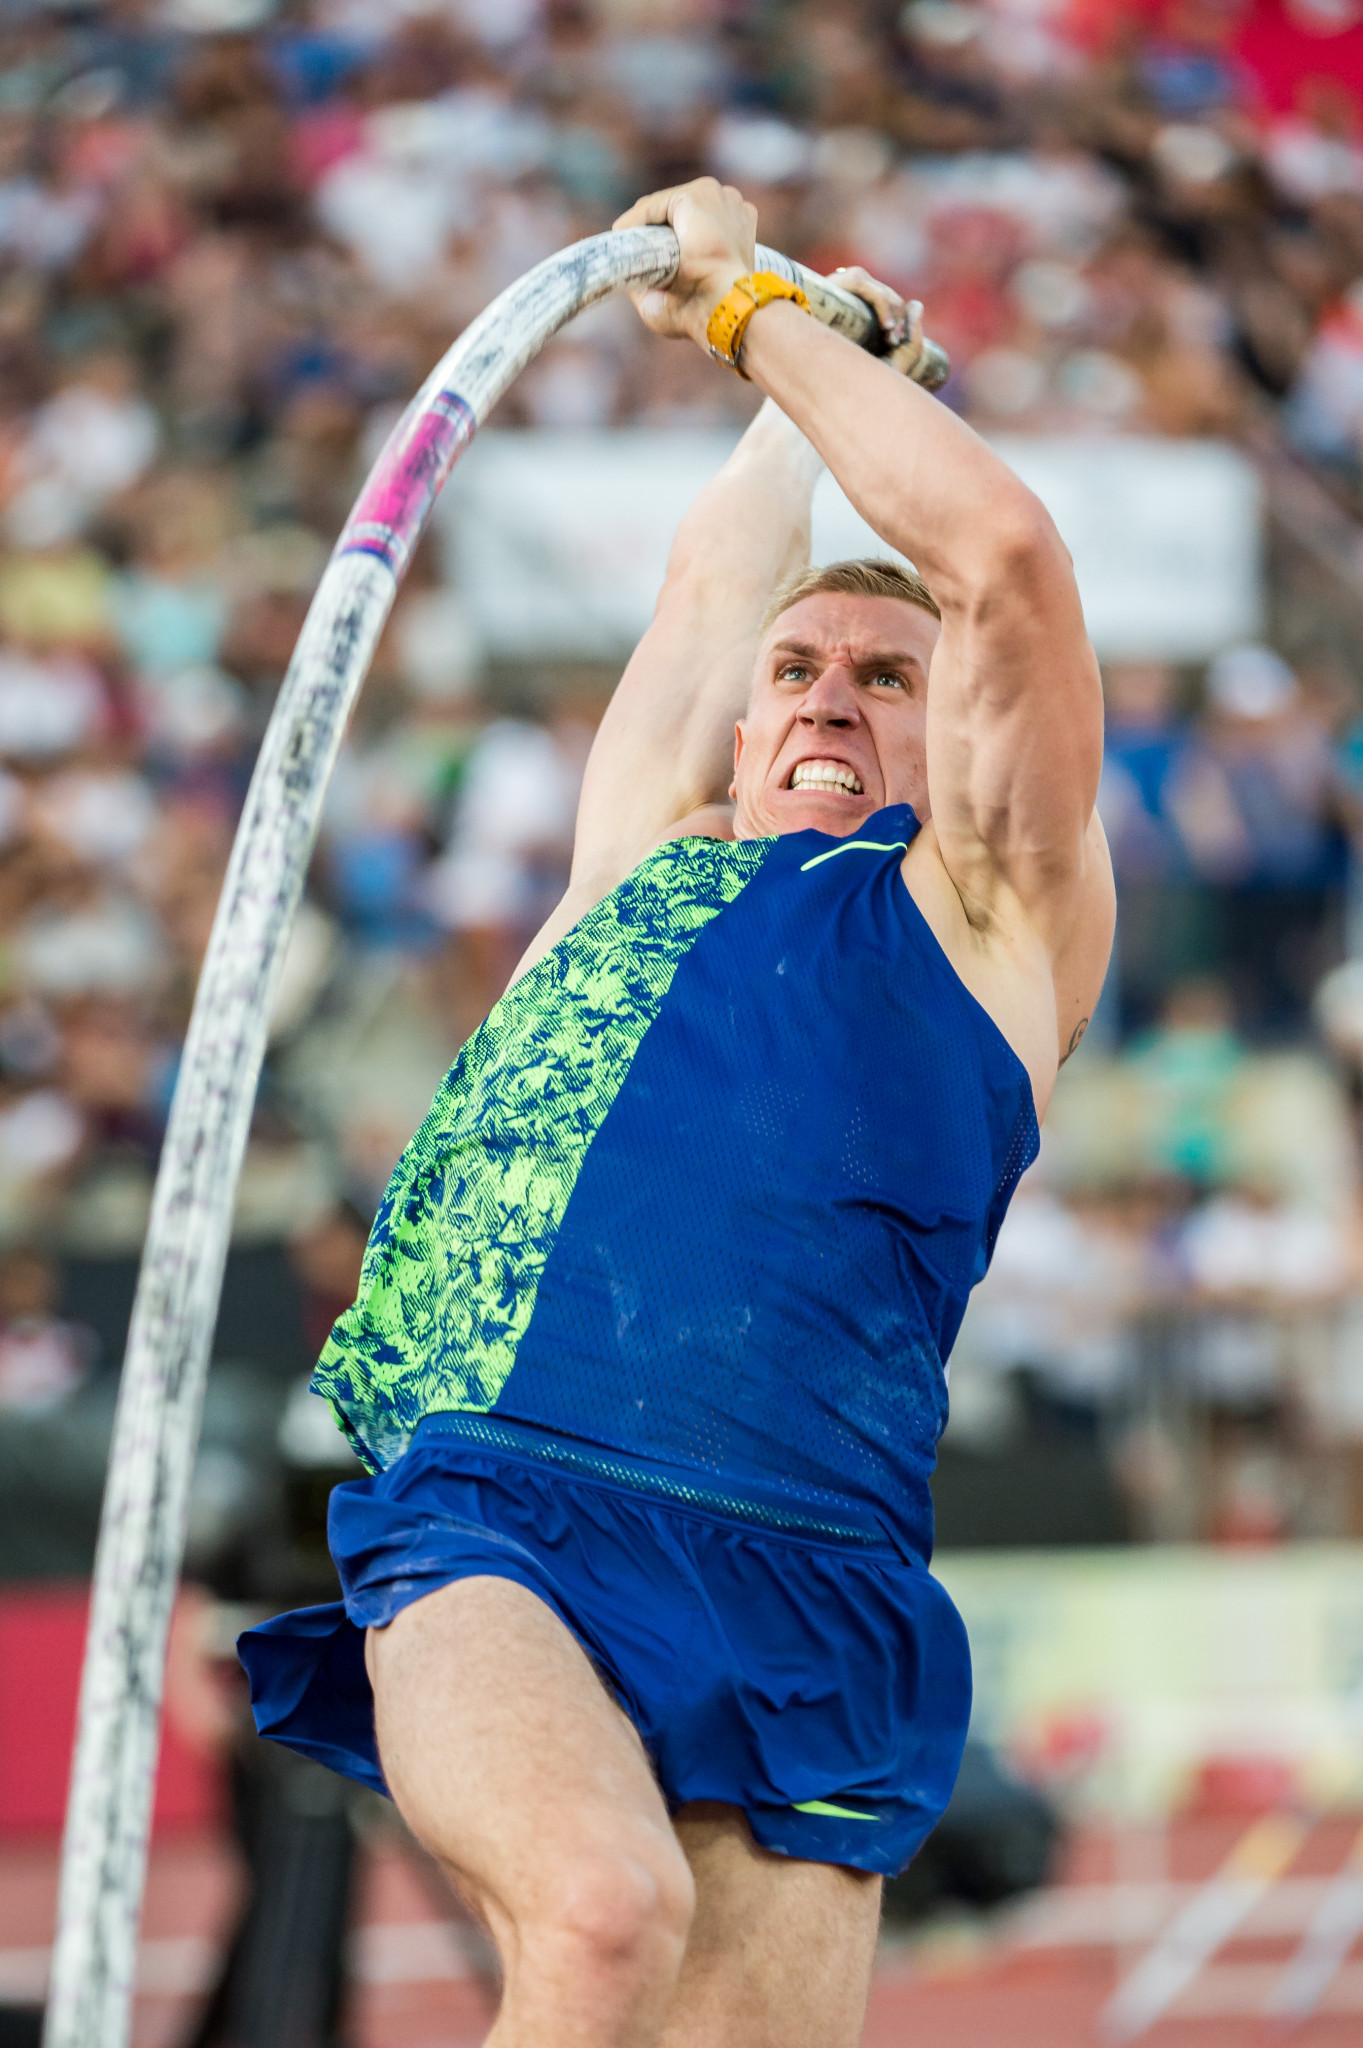 Poland's Piotr Lisek won the pole vault at the IAAF Diamond League in Switzerland in a personal best 6.01 metres ©Getty Images